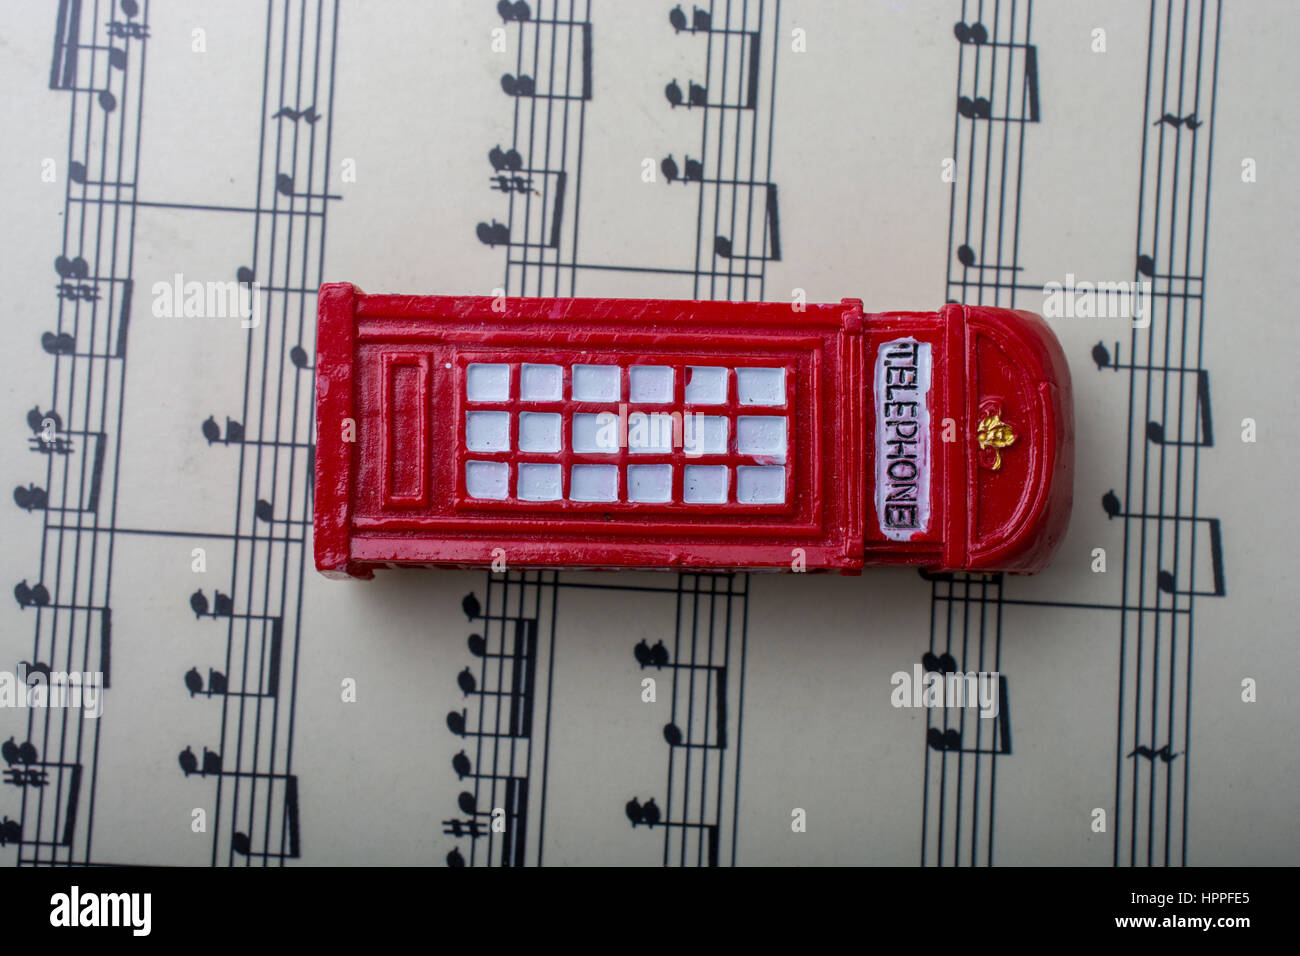 Telephone booth is placed on paper with musical notes Stock Photo